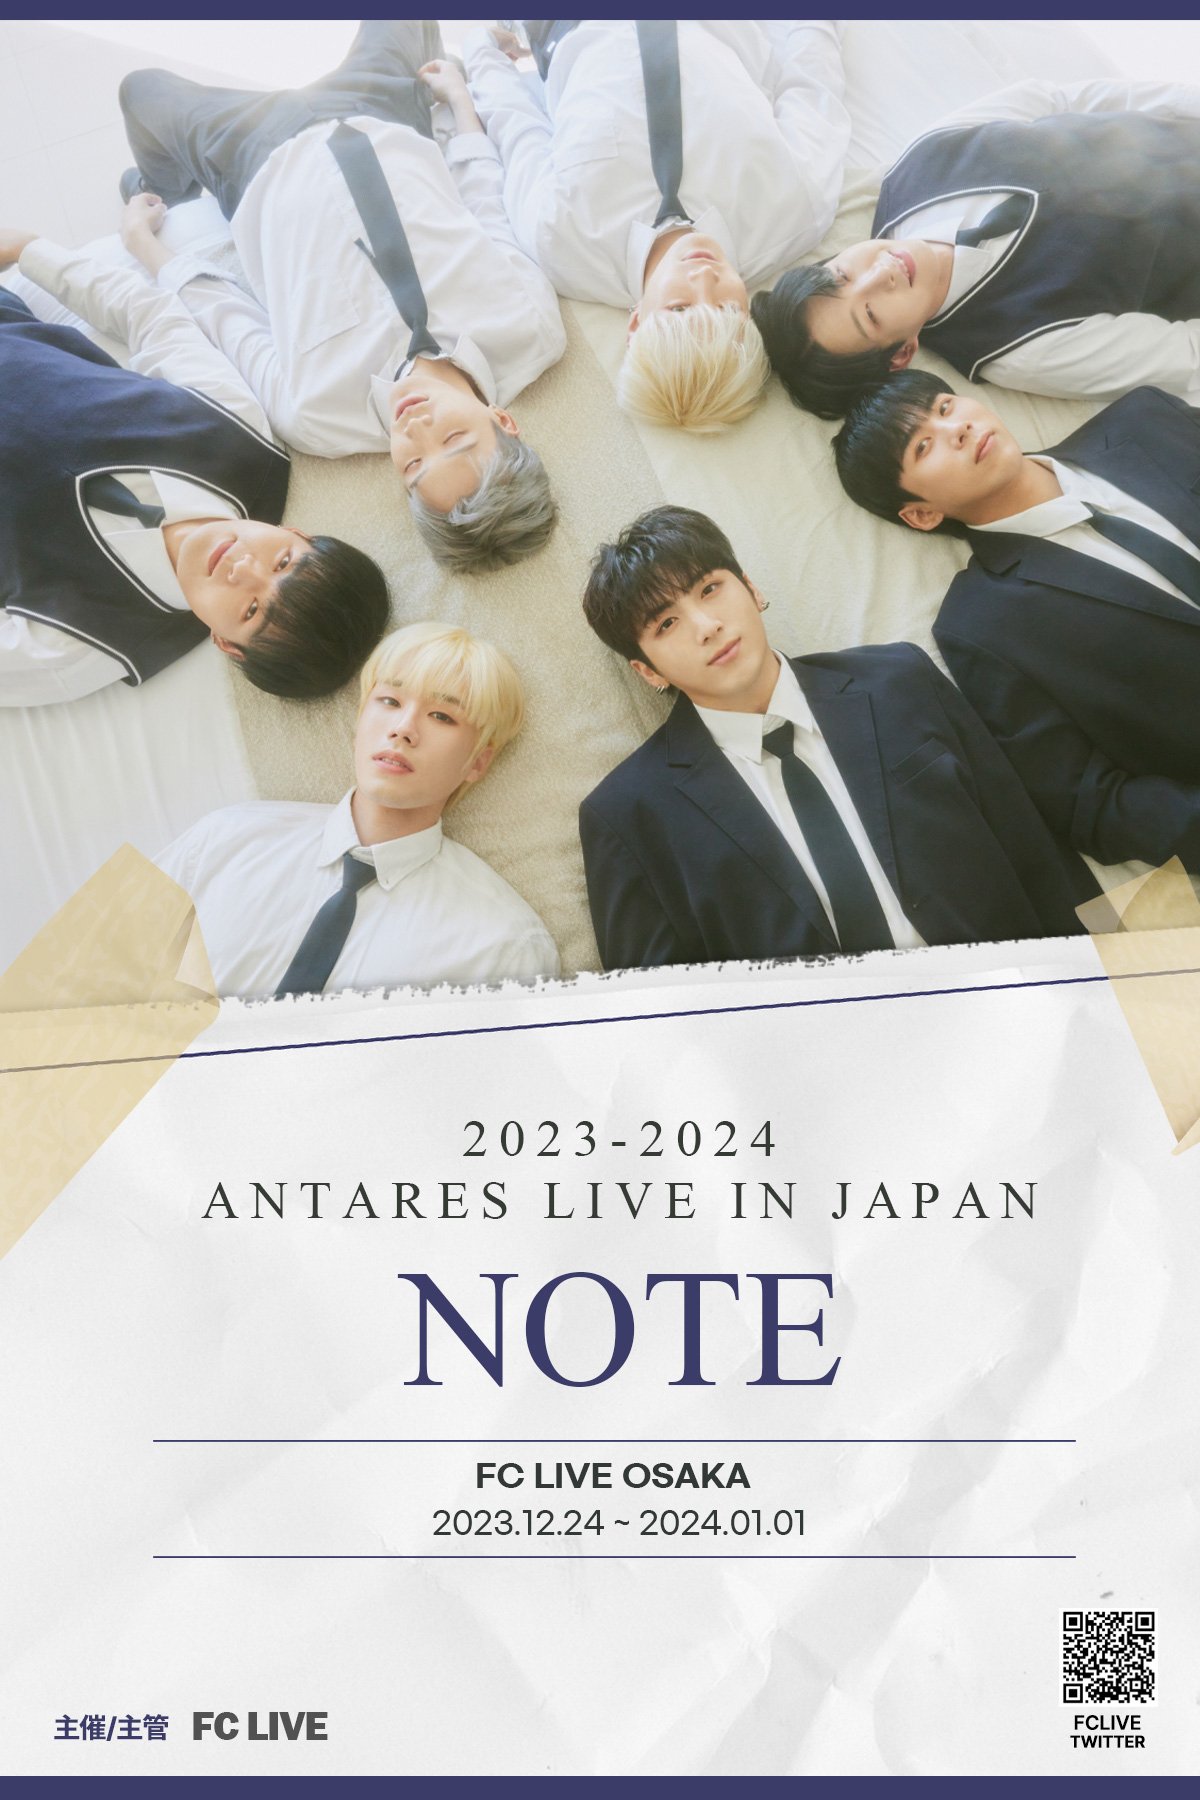 2023 2024 ANTARES LIVE IN JAPAN NOTE